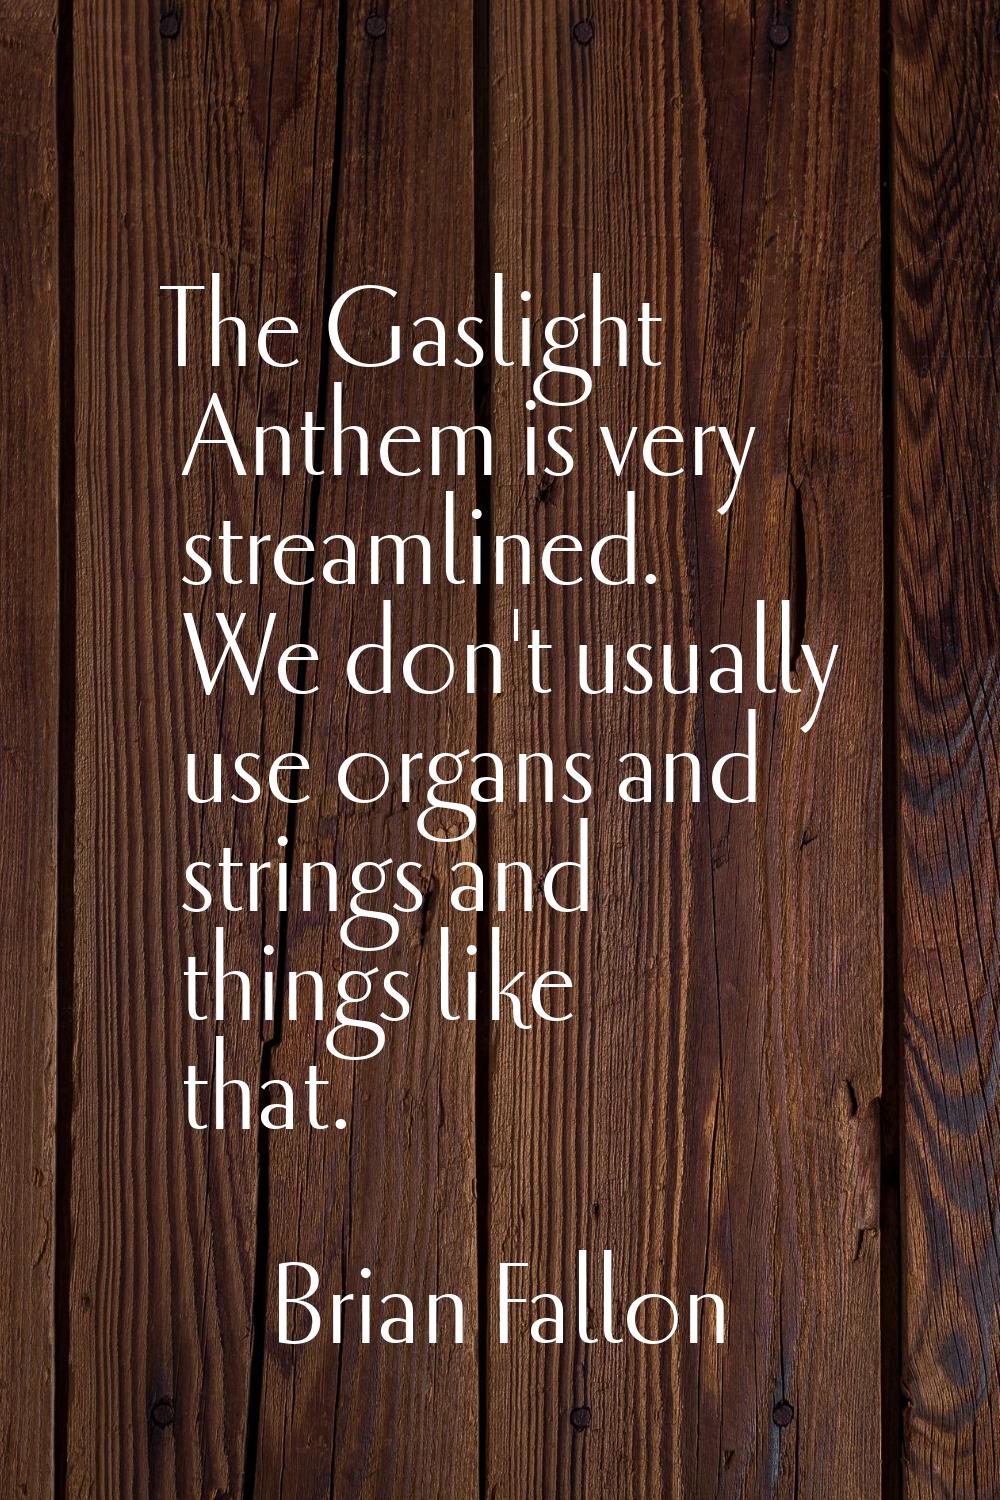 The Gaslight Anthem is very streamlined. We don't usually use organs and strings and things like th